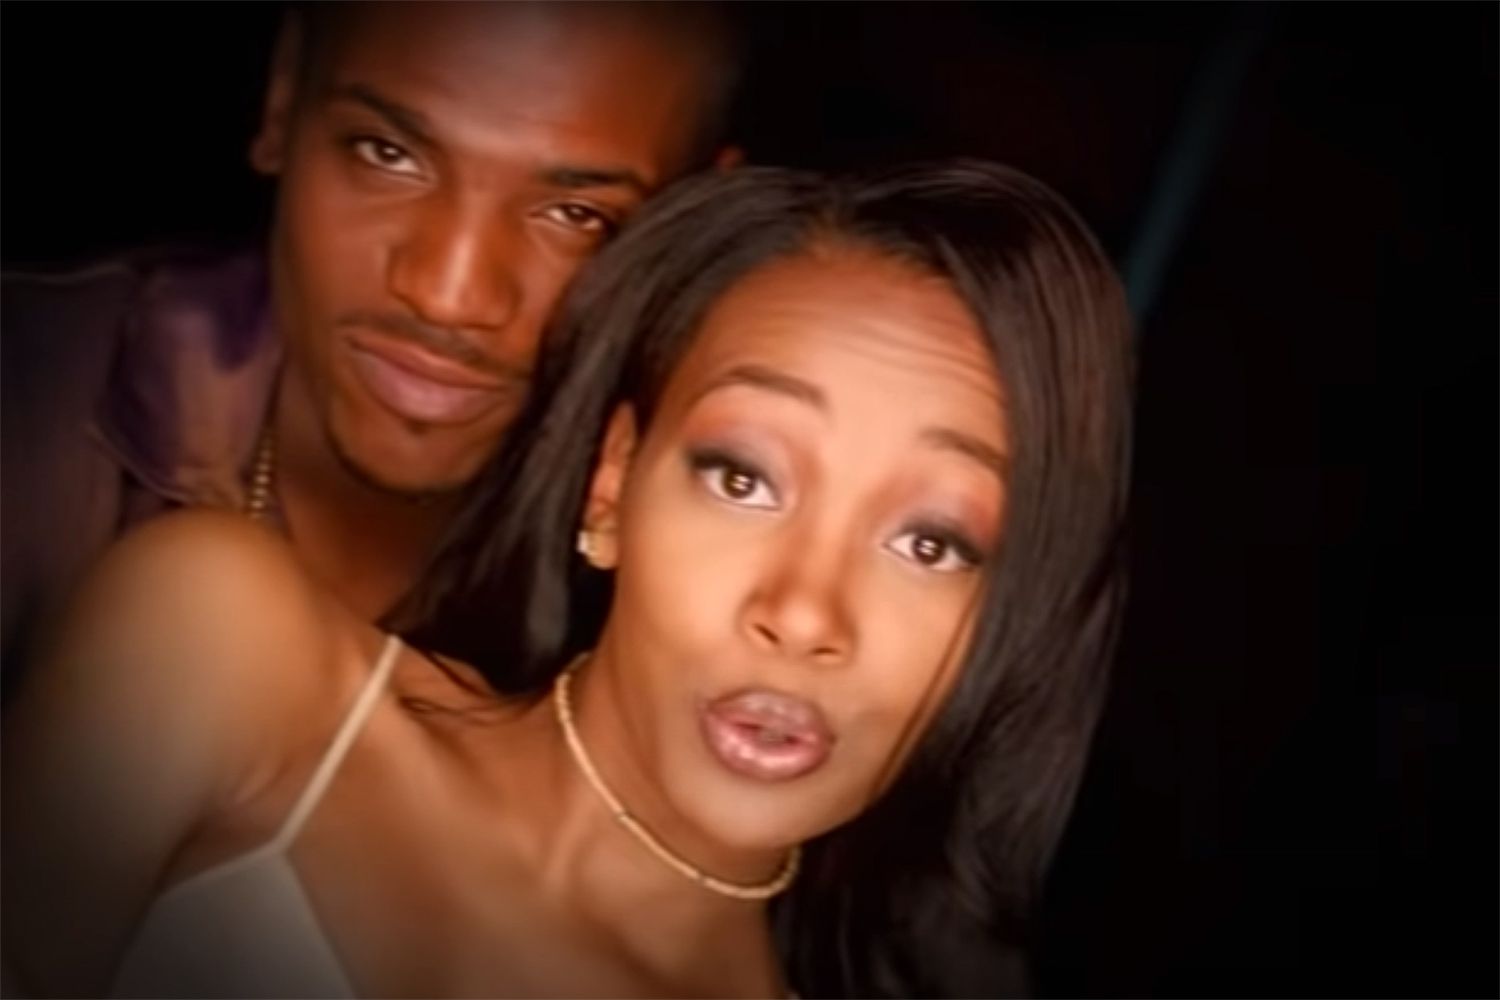 Mekhi Phifer reflects on being the boy in Brandy and Monica's 'The Boy Is Mine' music video - Entertainment Weekly